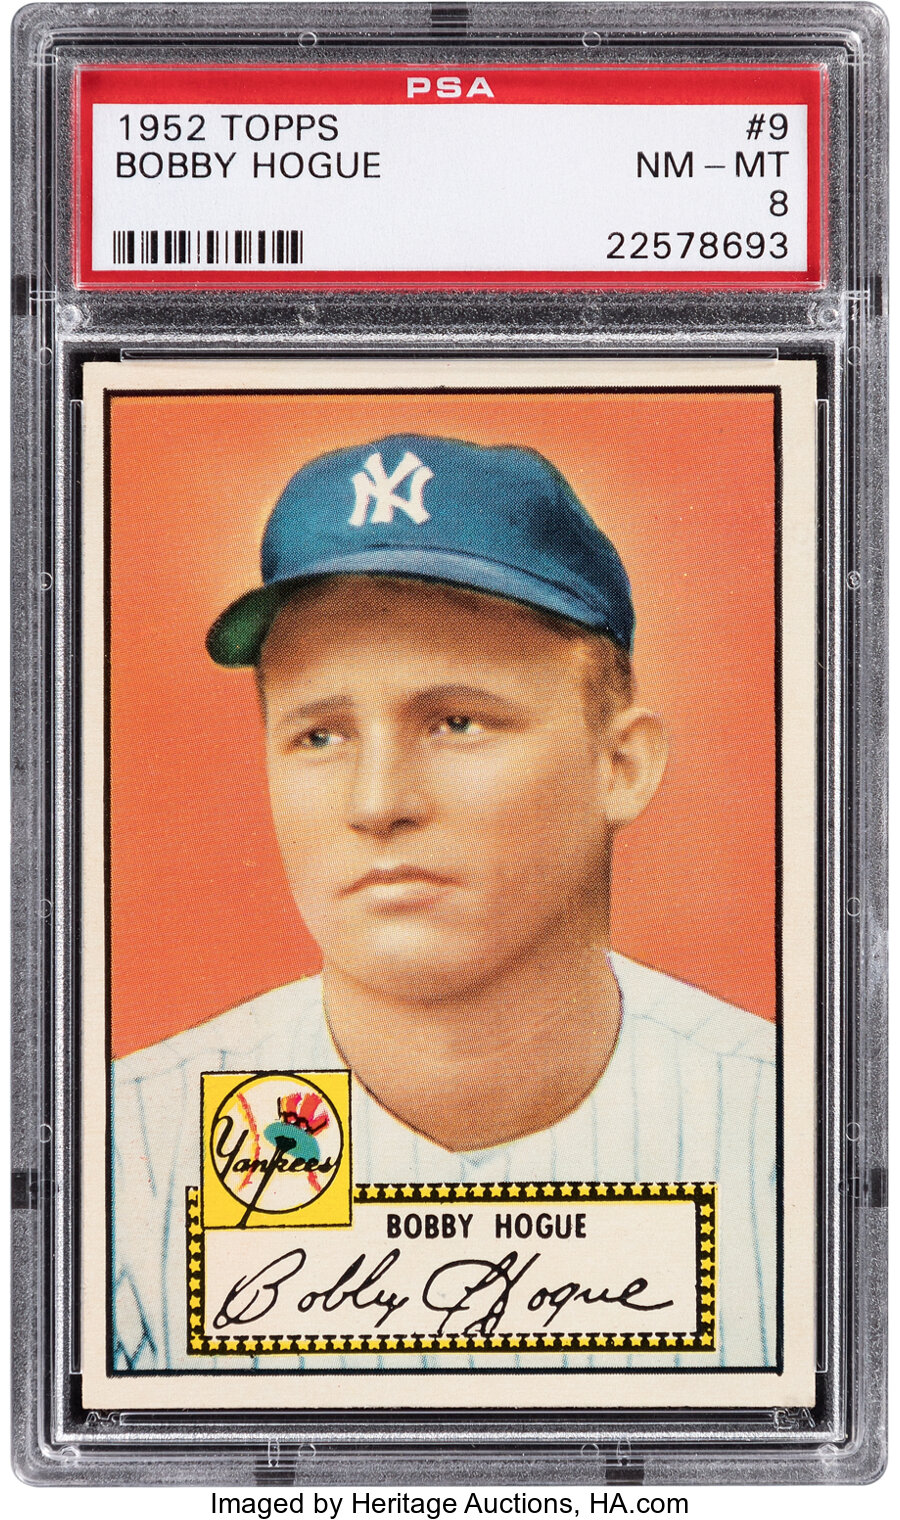 1952 Topps Bobby Hogue #9 PSA NM-MT 8 - Two Higher